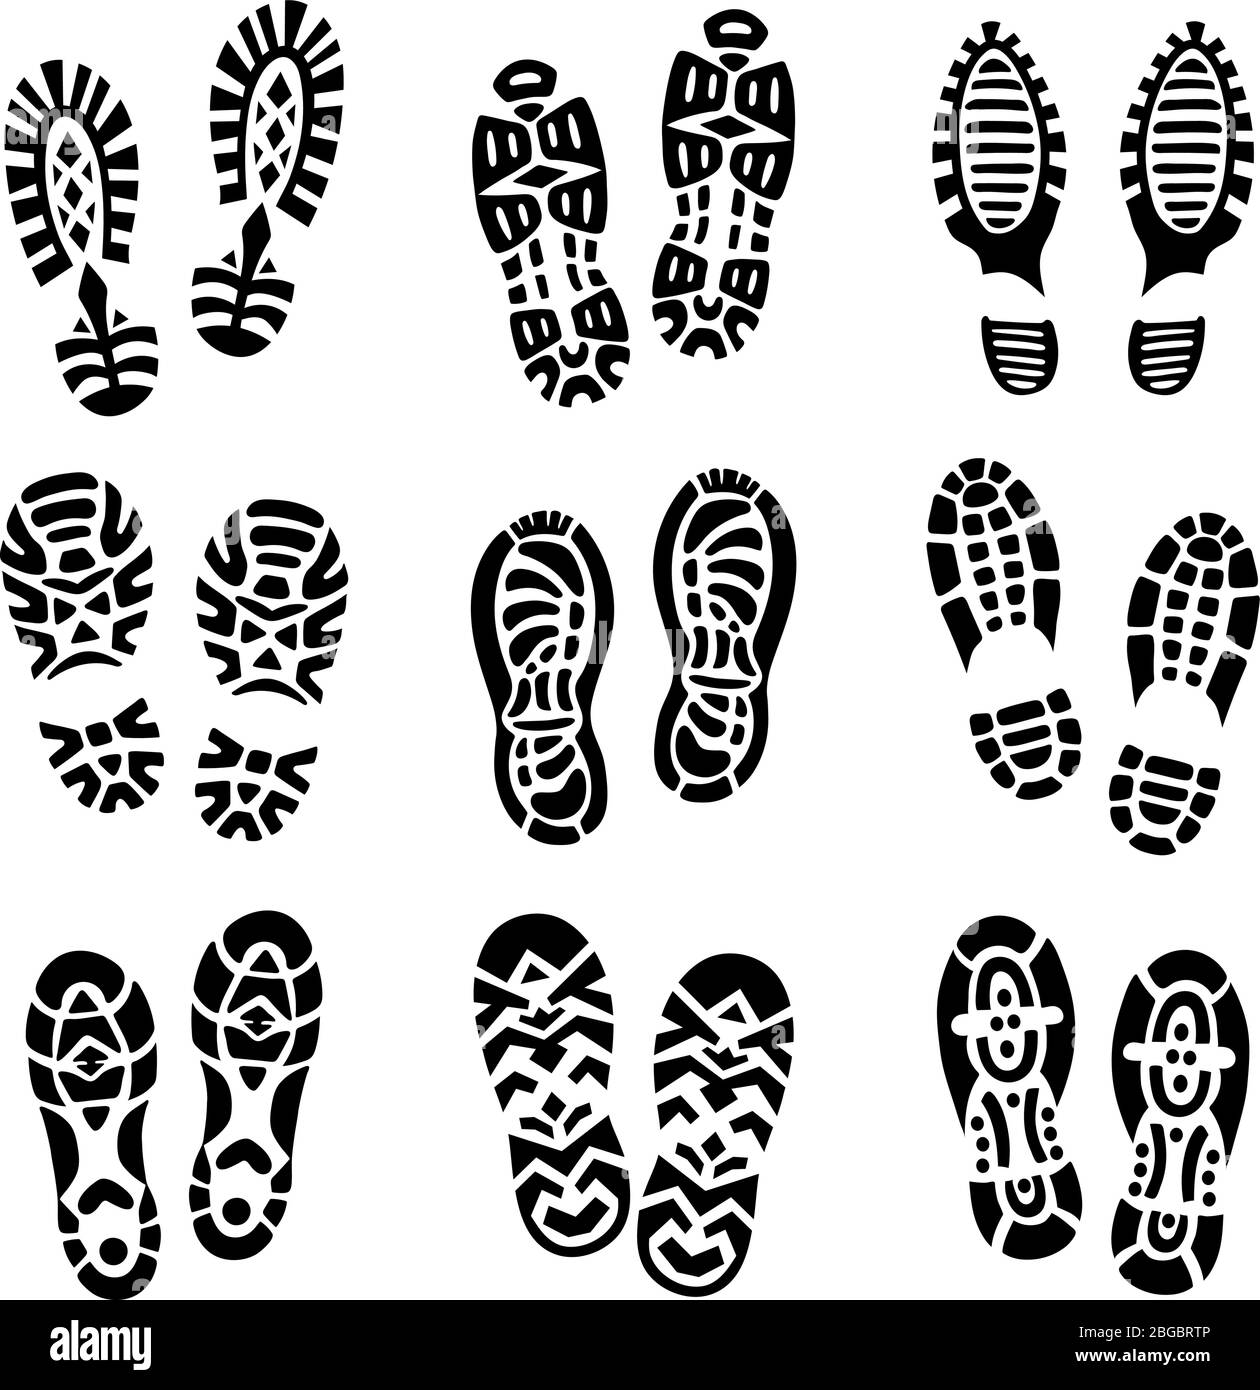 Different types of footprint. Monochrome vector illustrations Stock Vector